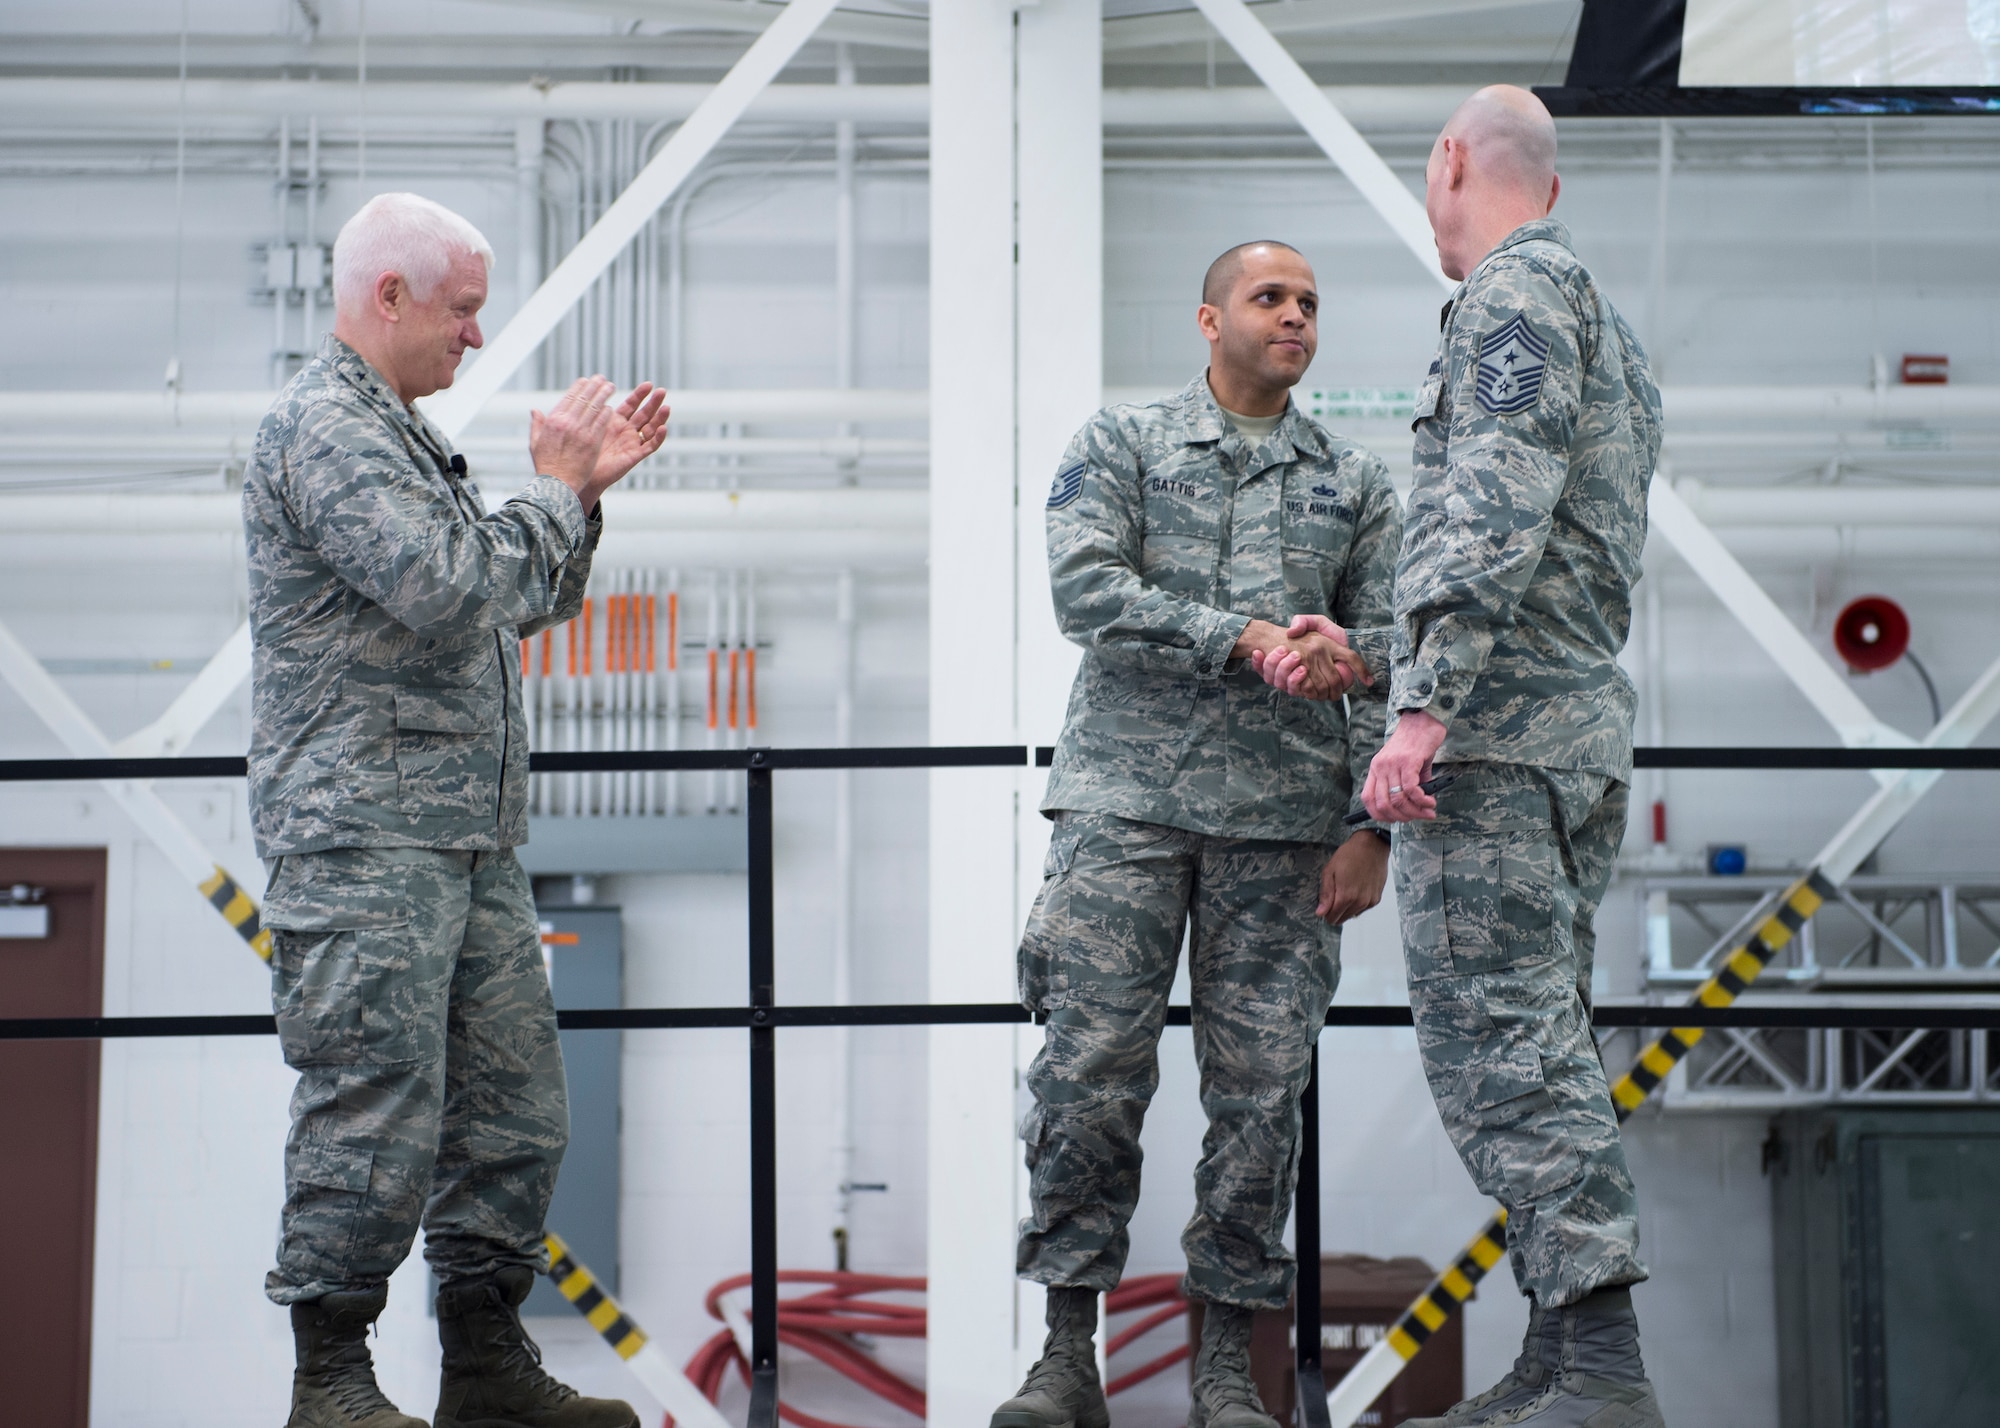 U.S. Air Force Tech. Sgt. Rodney Gattis, 133rd Force Support Squadron, is recognized and coined for earning recruiting and retention manager of the quarter in St. Paul, Minn., March 25, 2018.